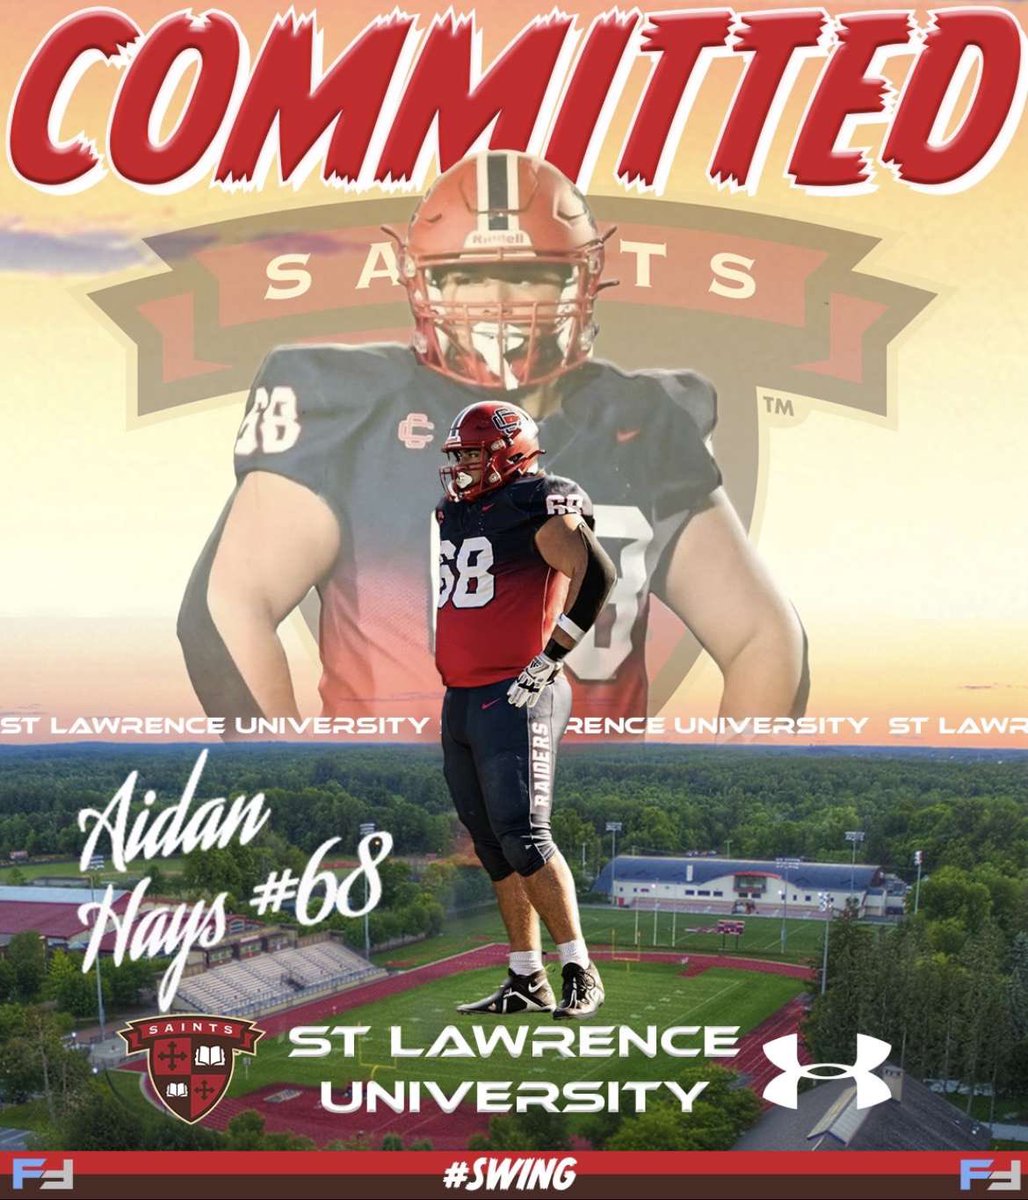 I am absolutely blessed and honored to announce my commitment to continue my academic and athletic careers @SLU_Football! Thanks so much to my coaches and teammates @CCRaider_sports, the amazing trainers @PactPerformance, and above all, my parents! Go Saints!